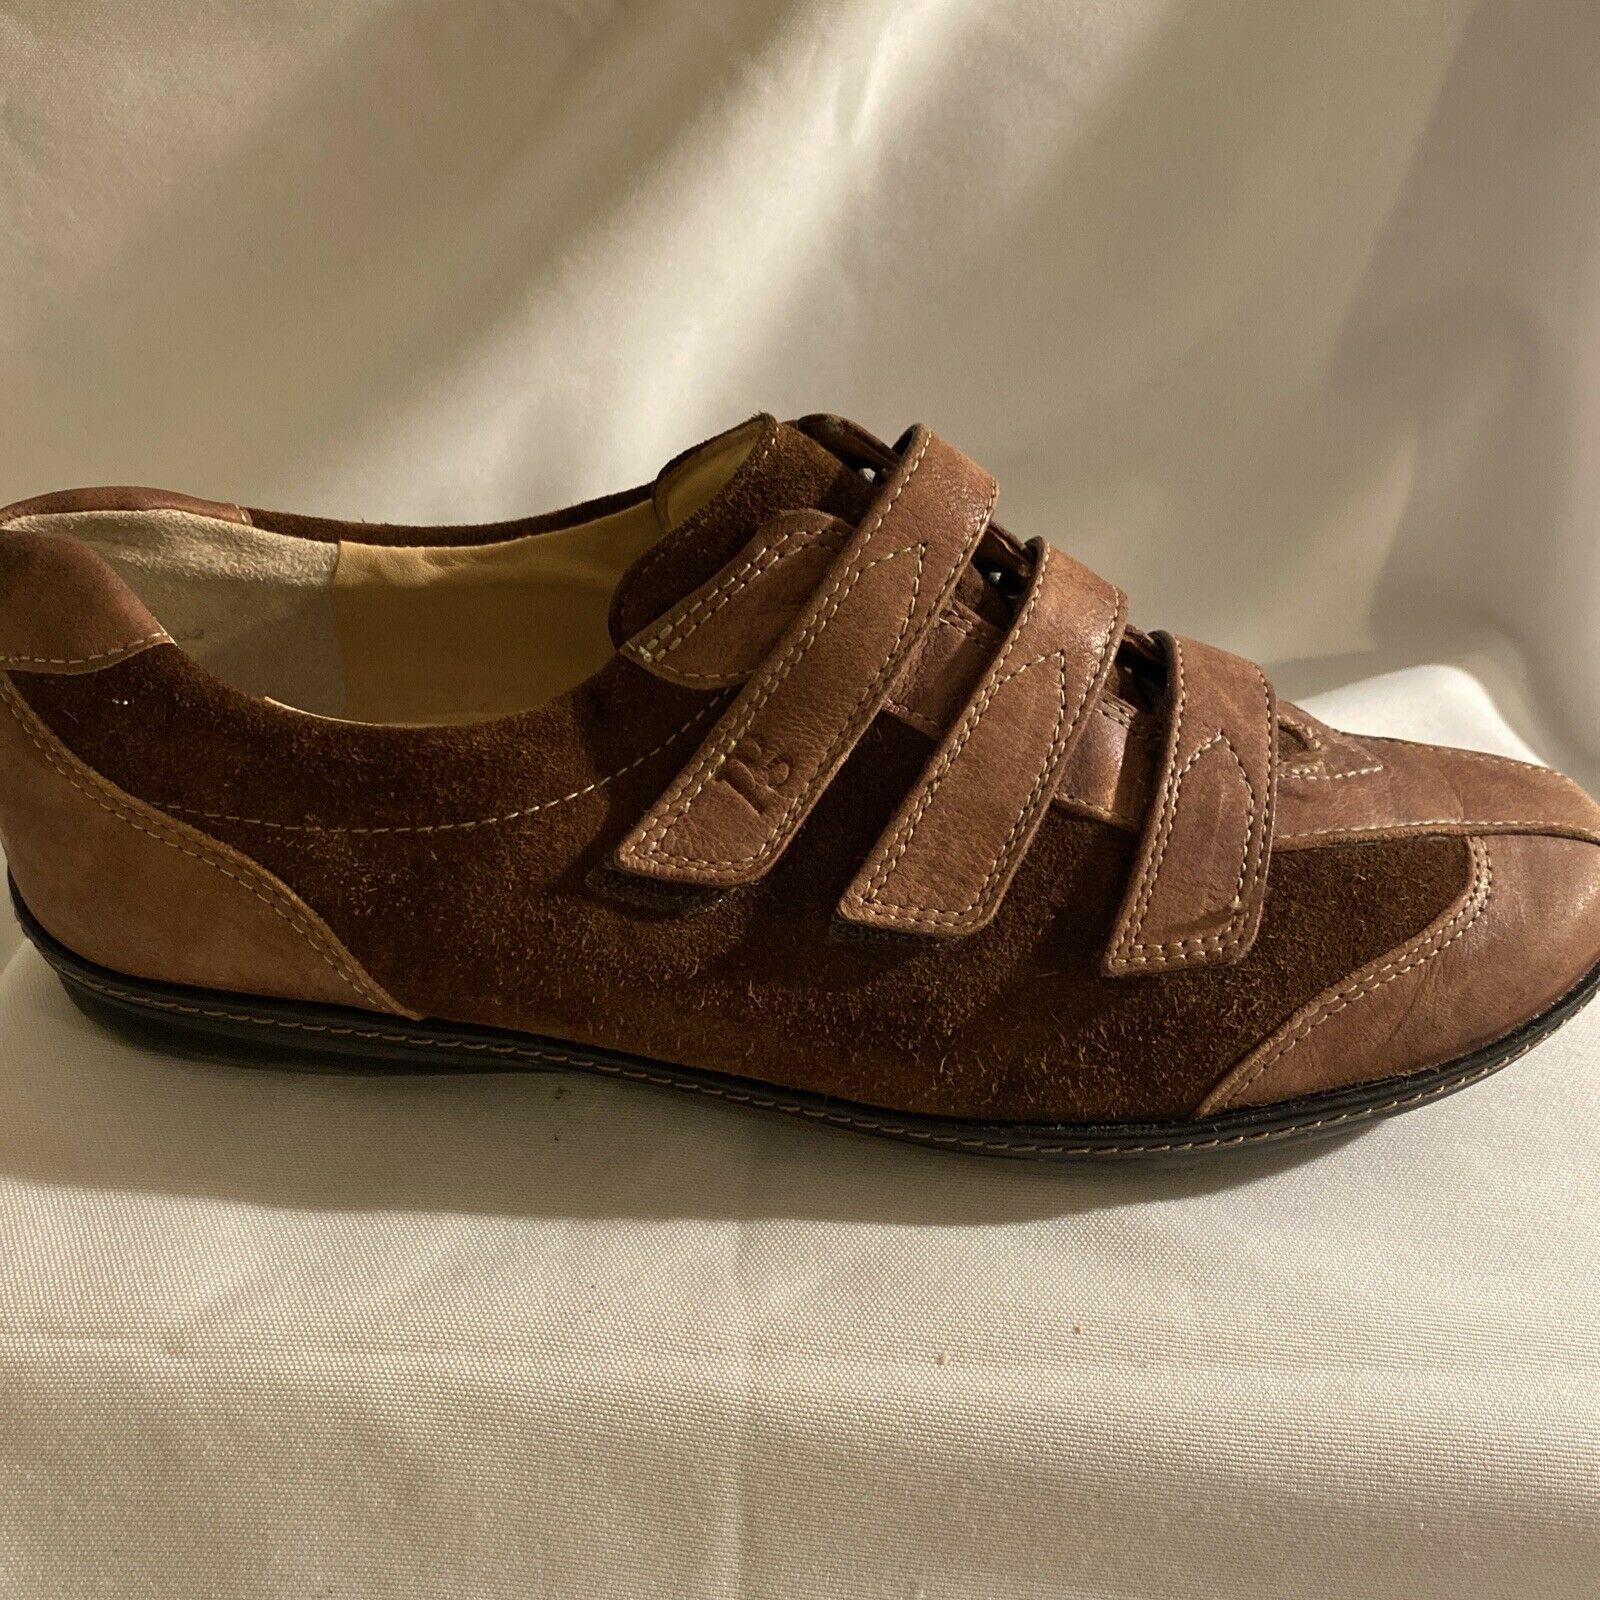 PAUL GREEN MUNCHEN Brown Leather & Suede Shoes Sneakers Sz 5.5 UK, Sz 8 US